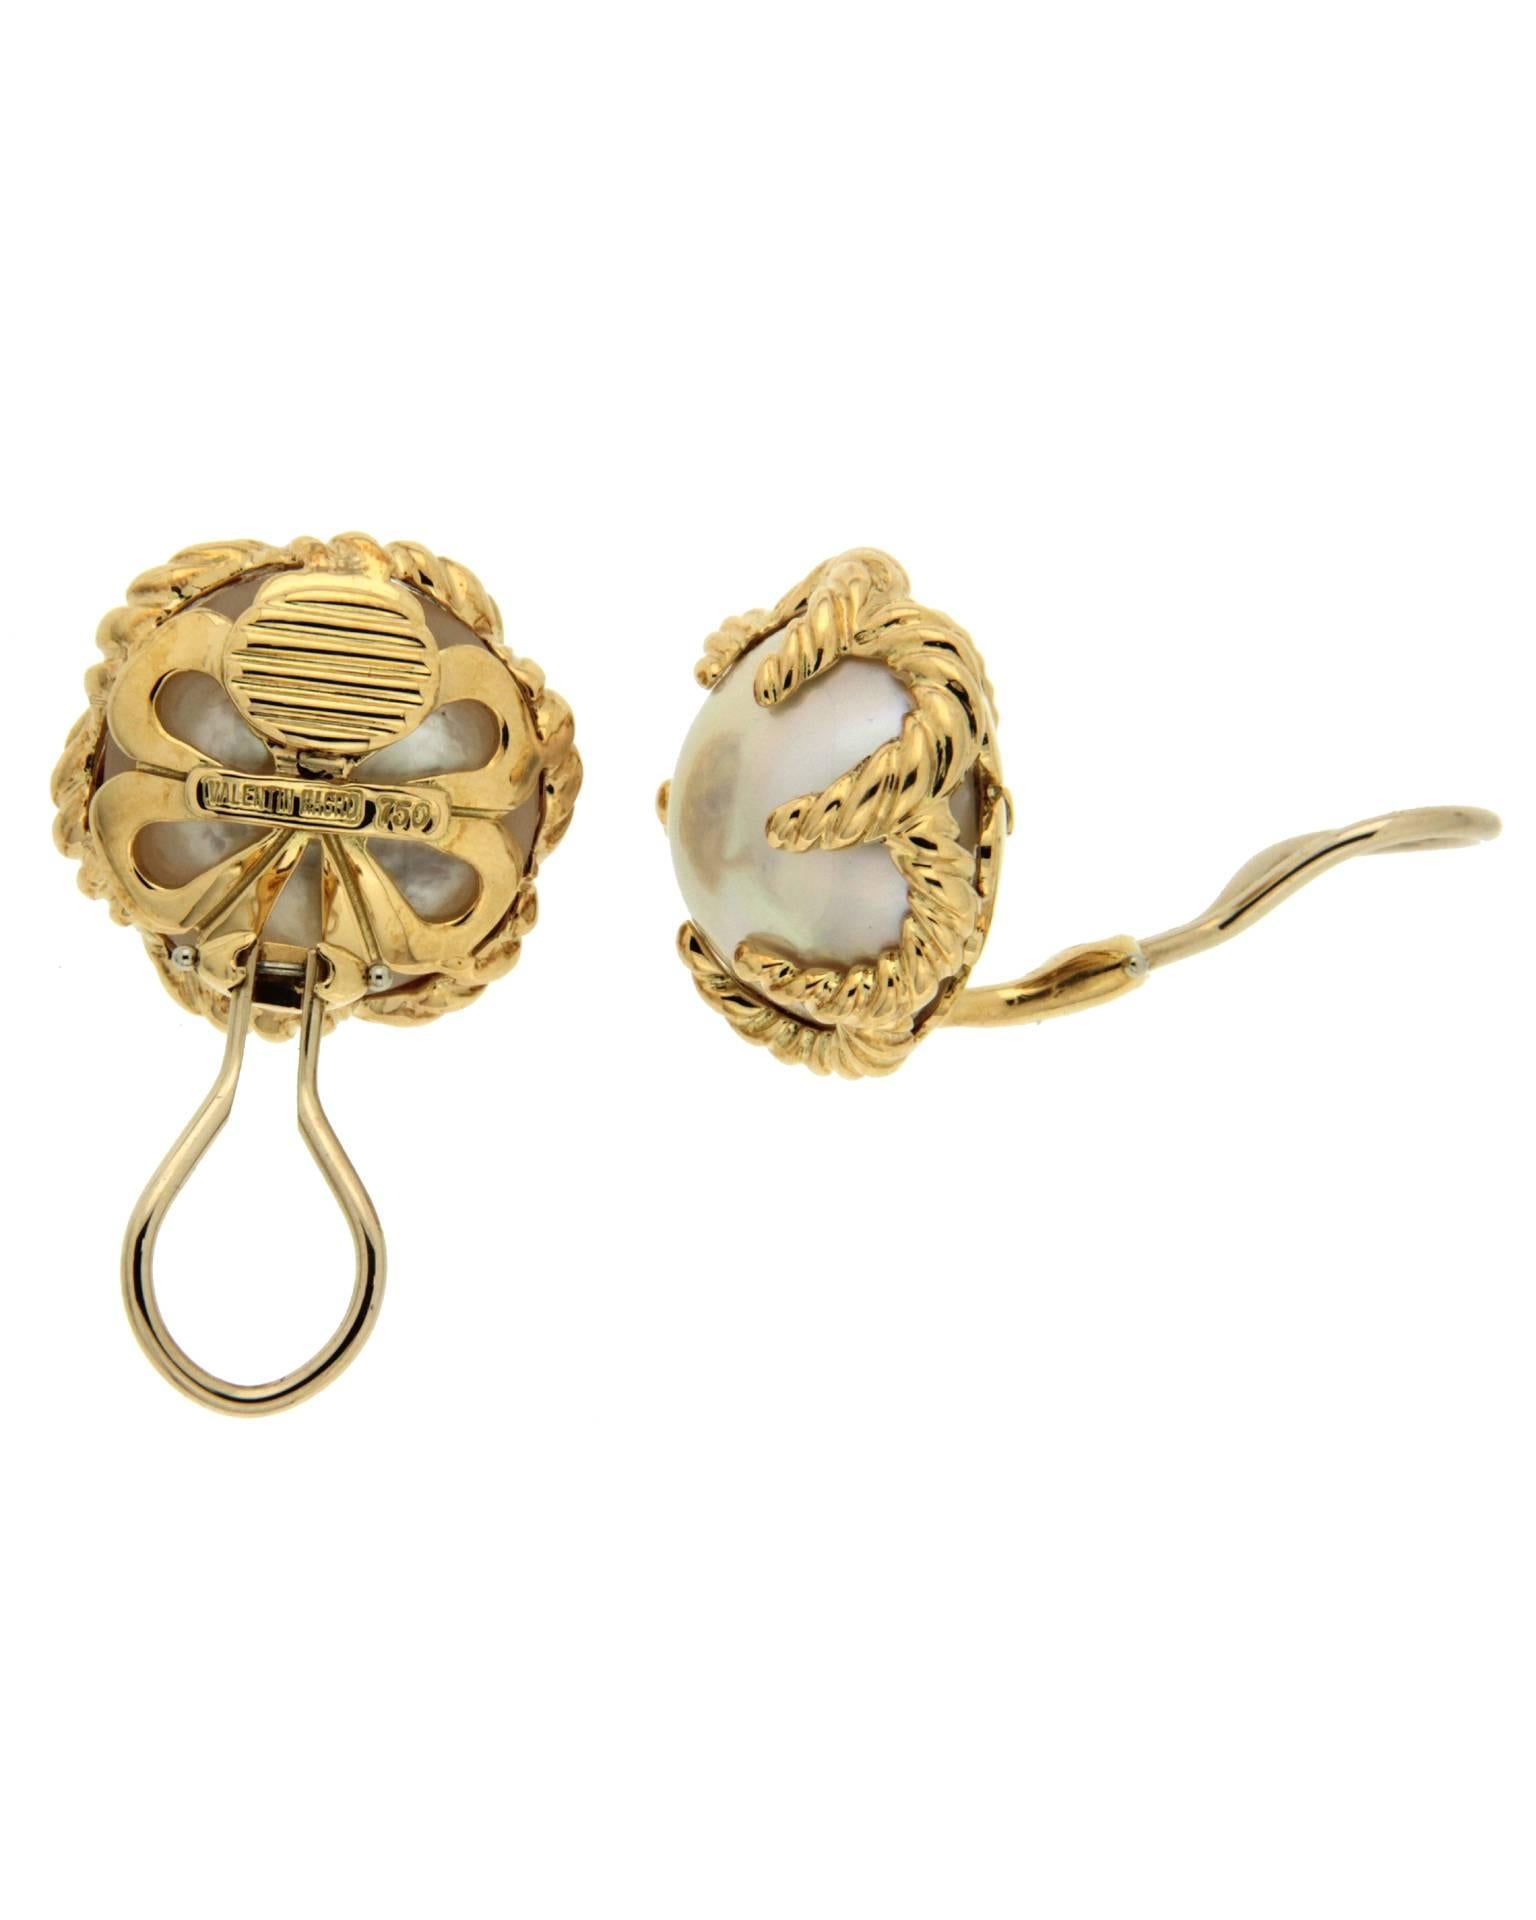 These mabe pearl earrings are made in 18kt yellow gold, with clip backs. Posts can be added upon request.